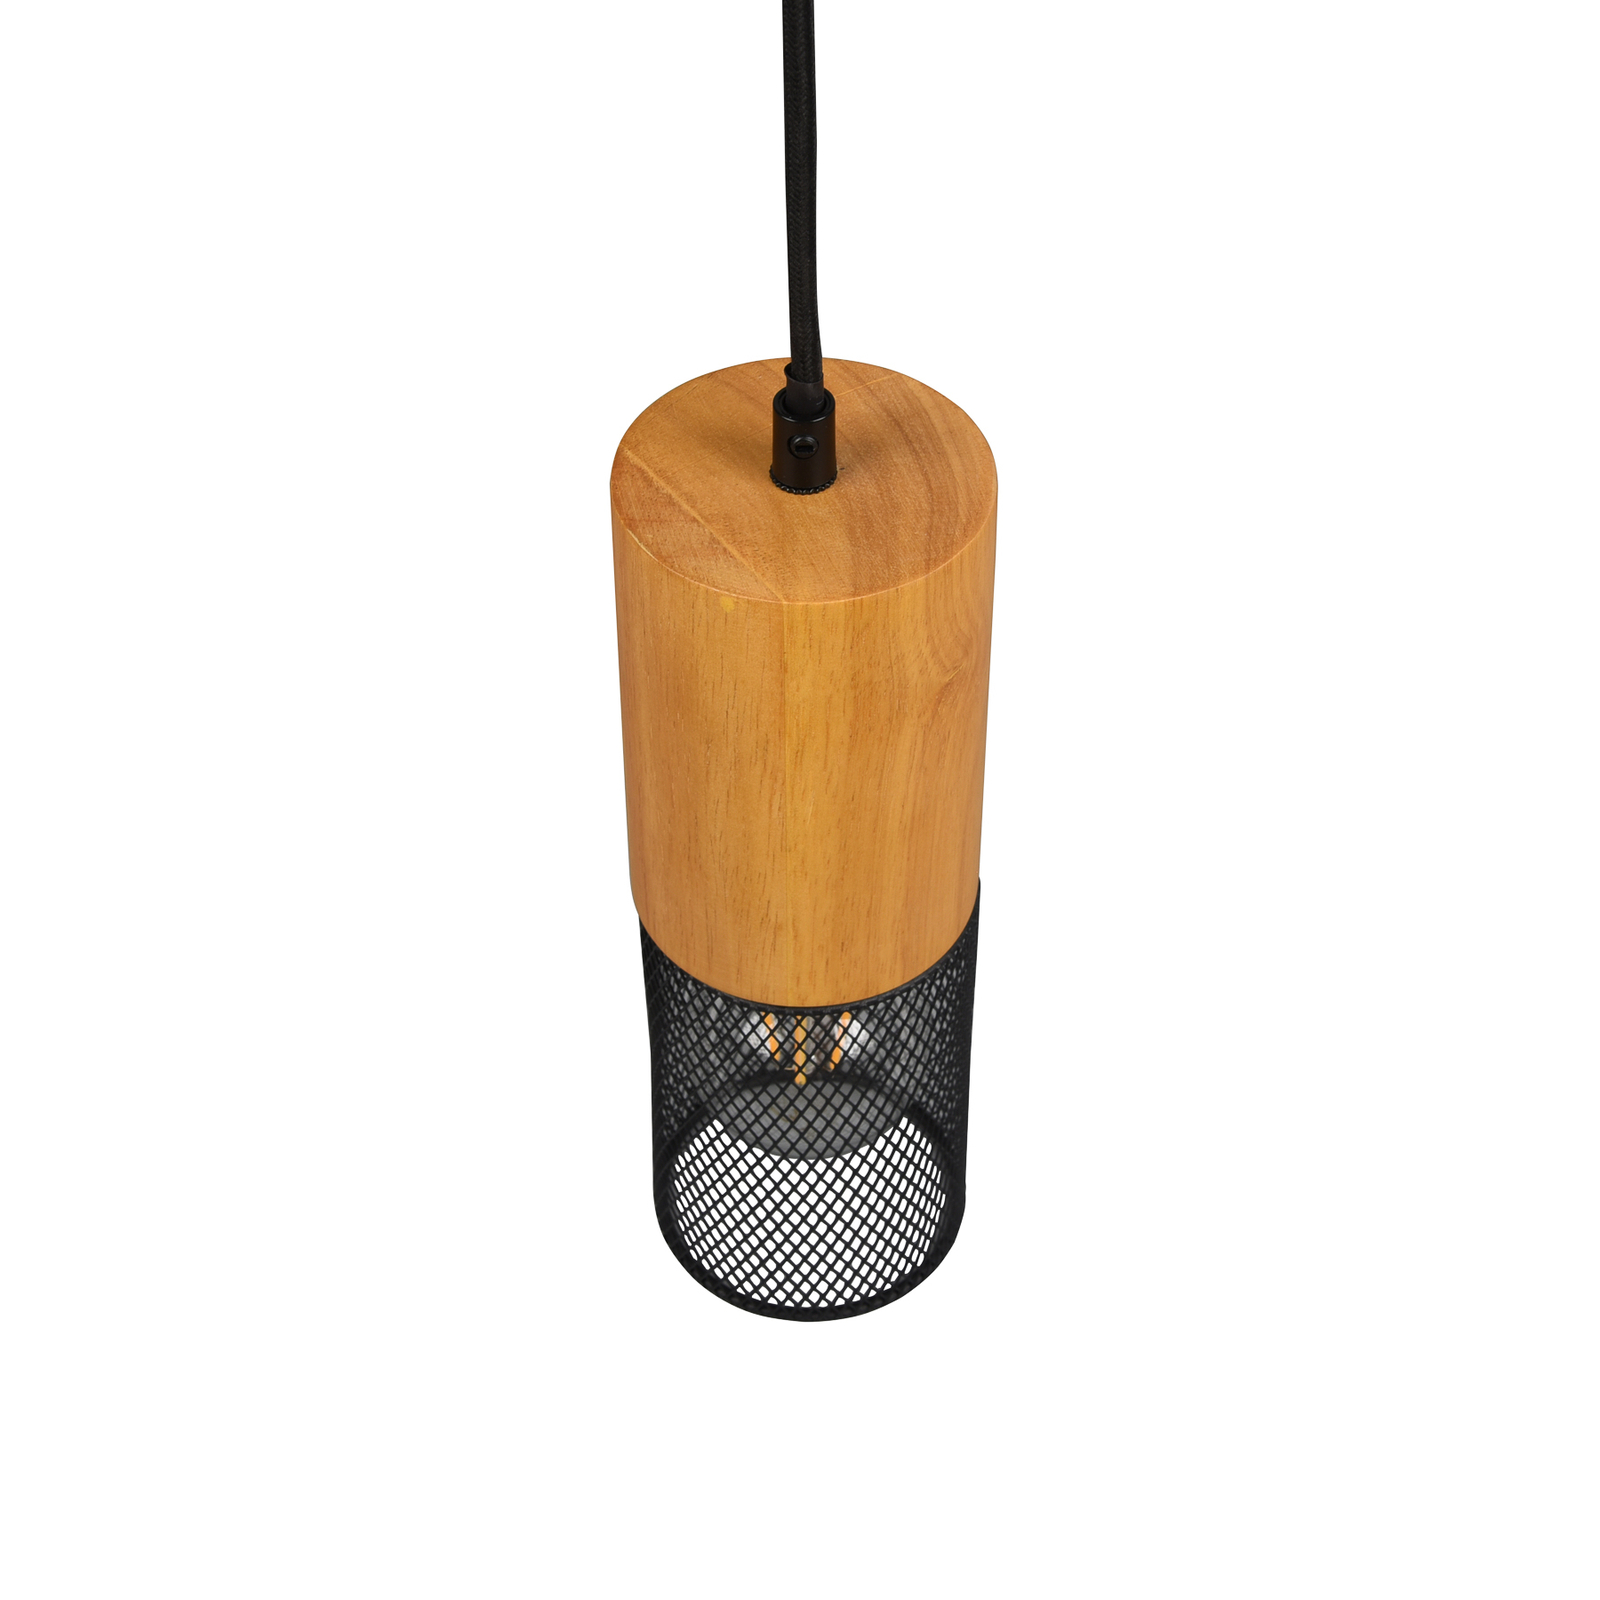 Tosh DUOline pendant light with wooden detail